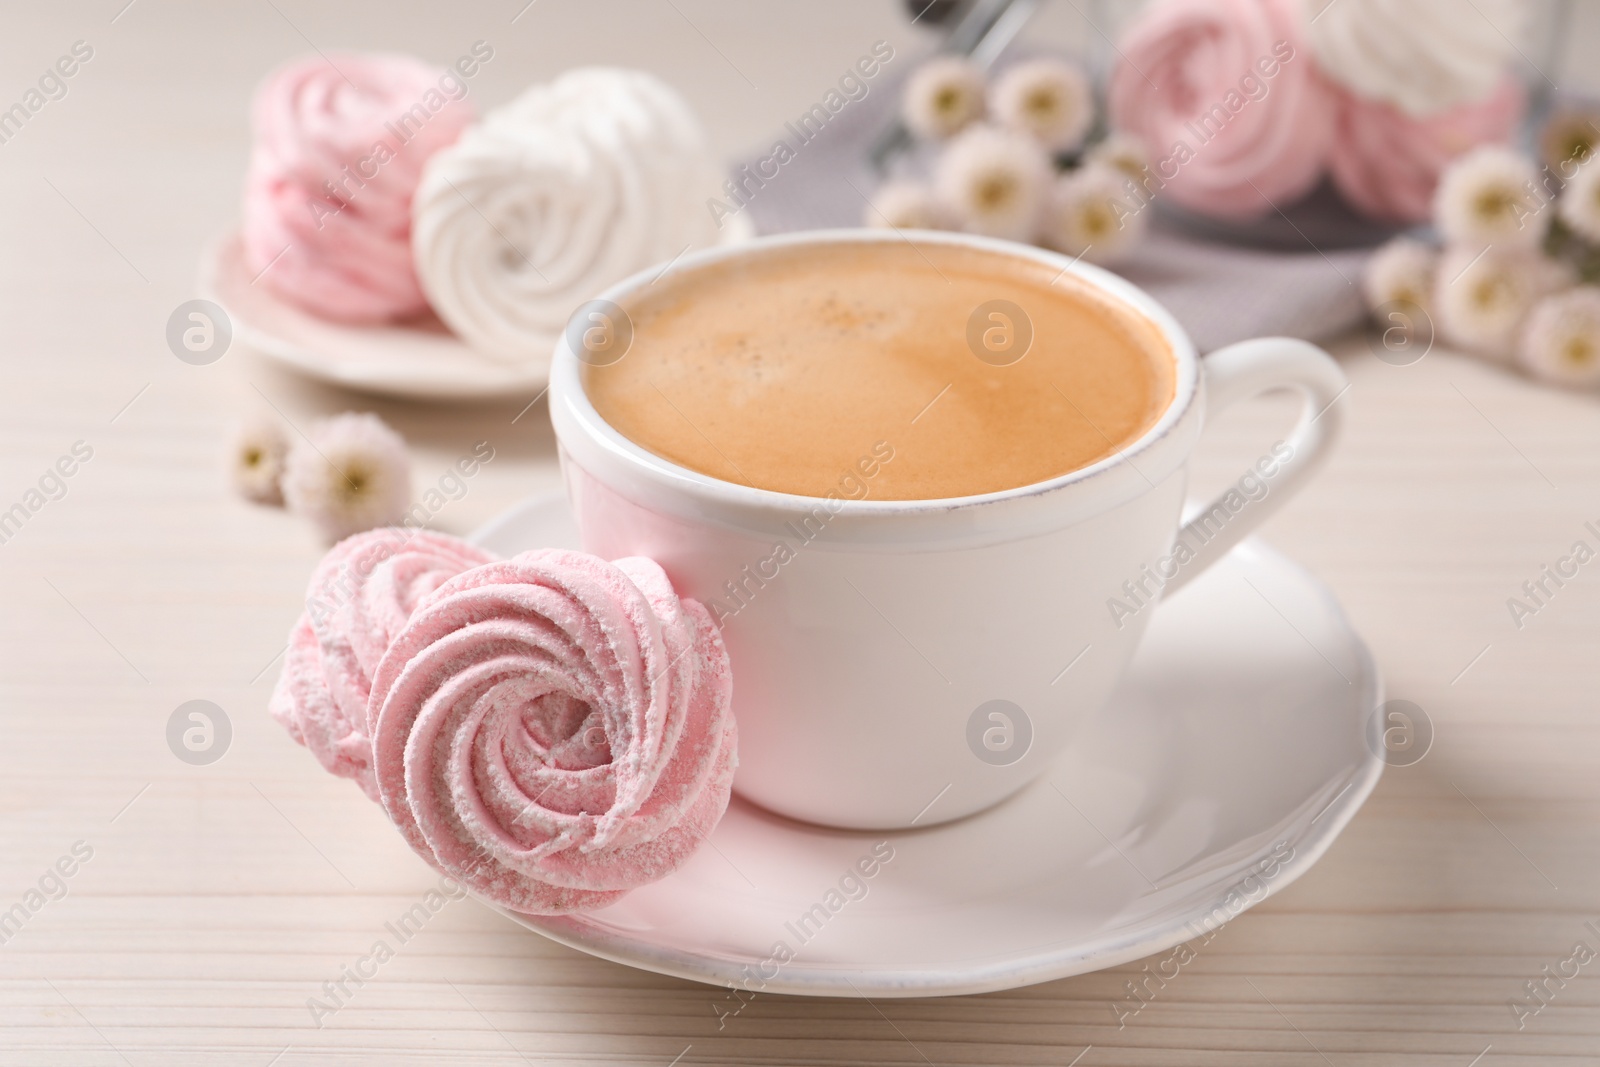 Photo of Delicious pink marshmallows and cup of coffee on wooden table